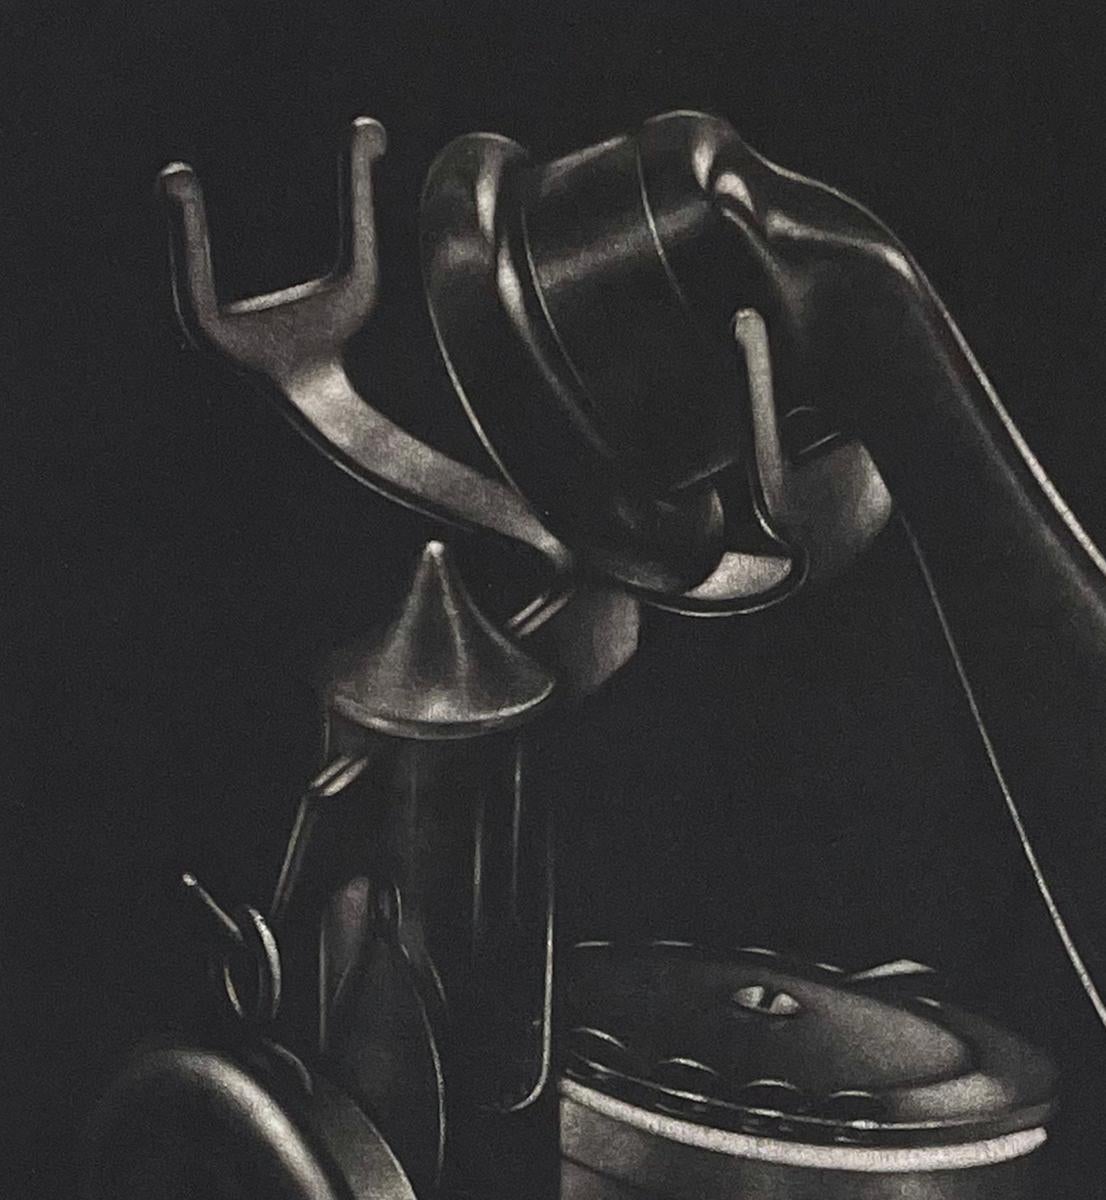 Signed and numbered 11/130. A black and white mezzotint of an antique rotary dial telephone, showing why Schkolnyk is considered a modern master of the mezzotint.   

Born in Paris and trained as a physician, Schkolnyk discovered his talent for